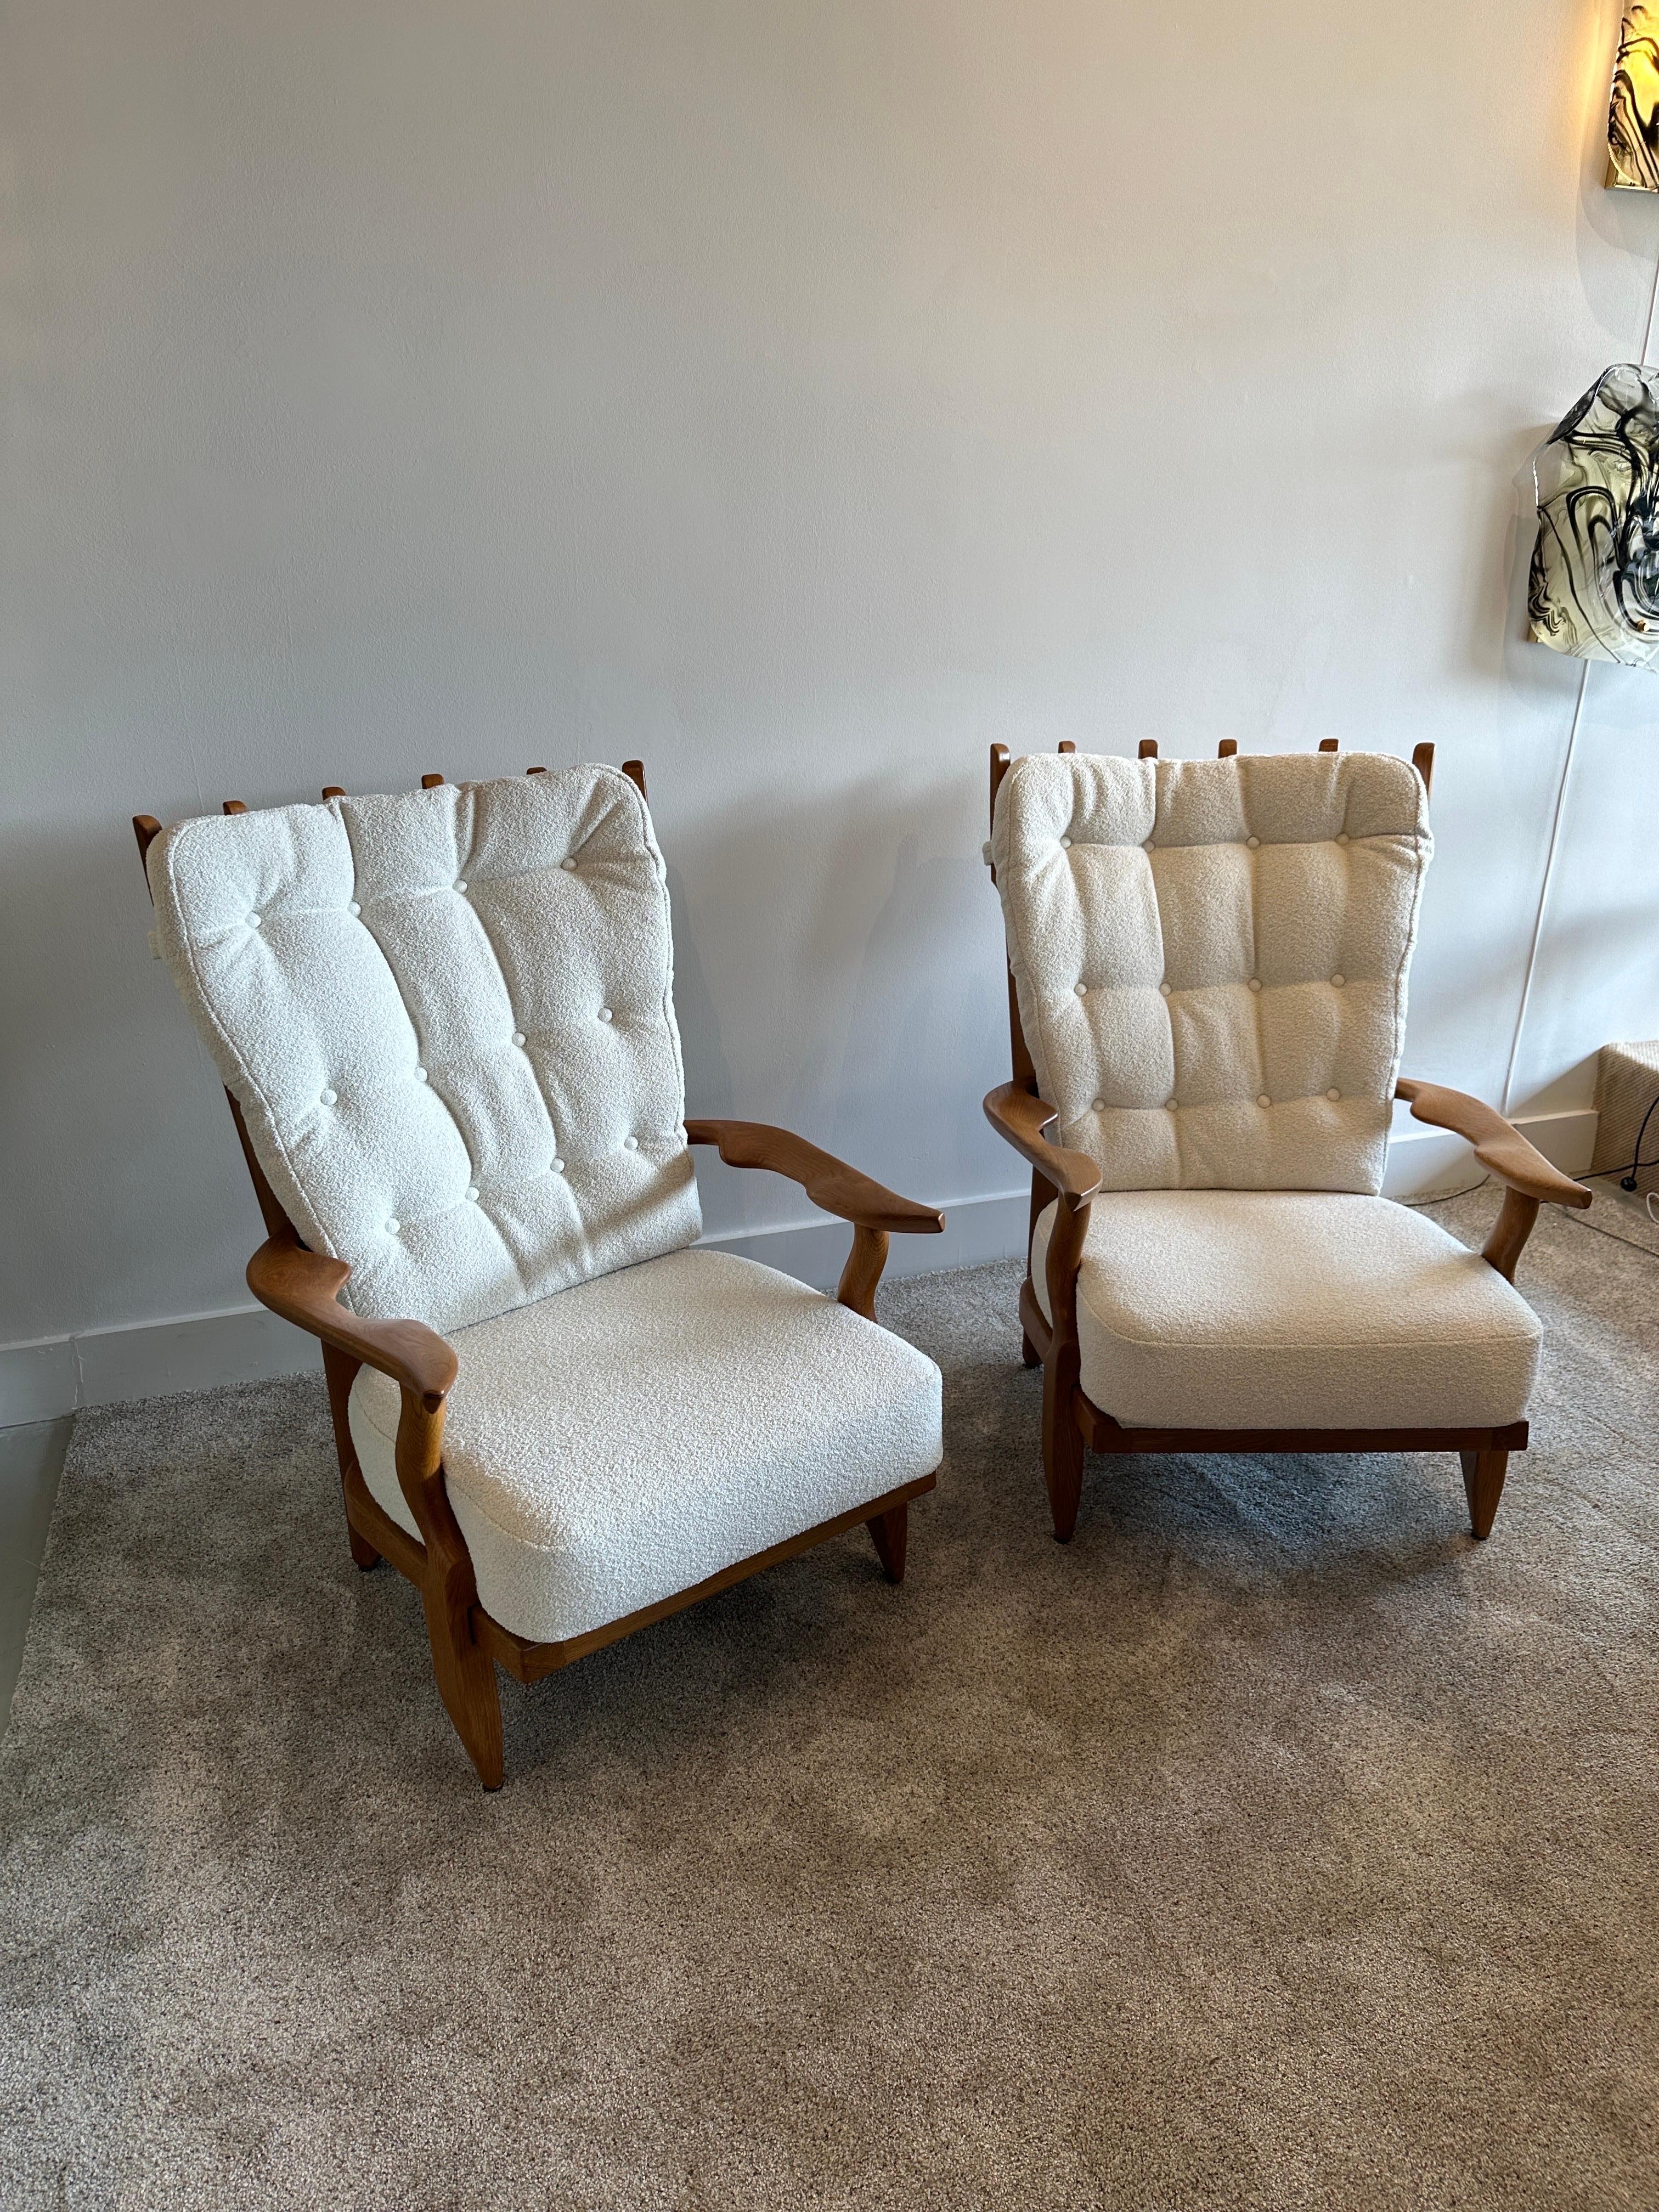 Guillerme et Chambron grand repos armchairs with oak frame and NEW Boucle fabric. Oak frame is solid and newly refinished to its original beauty. 

Robert Guillerme, based in Lille, Northern France, graduated from École Boulle in 1934 where he